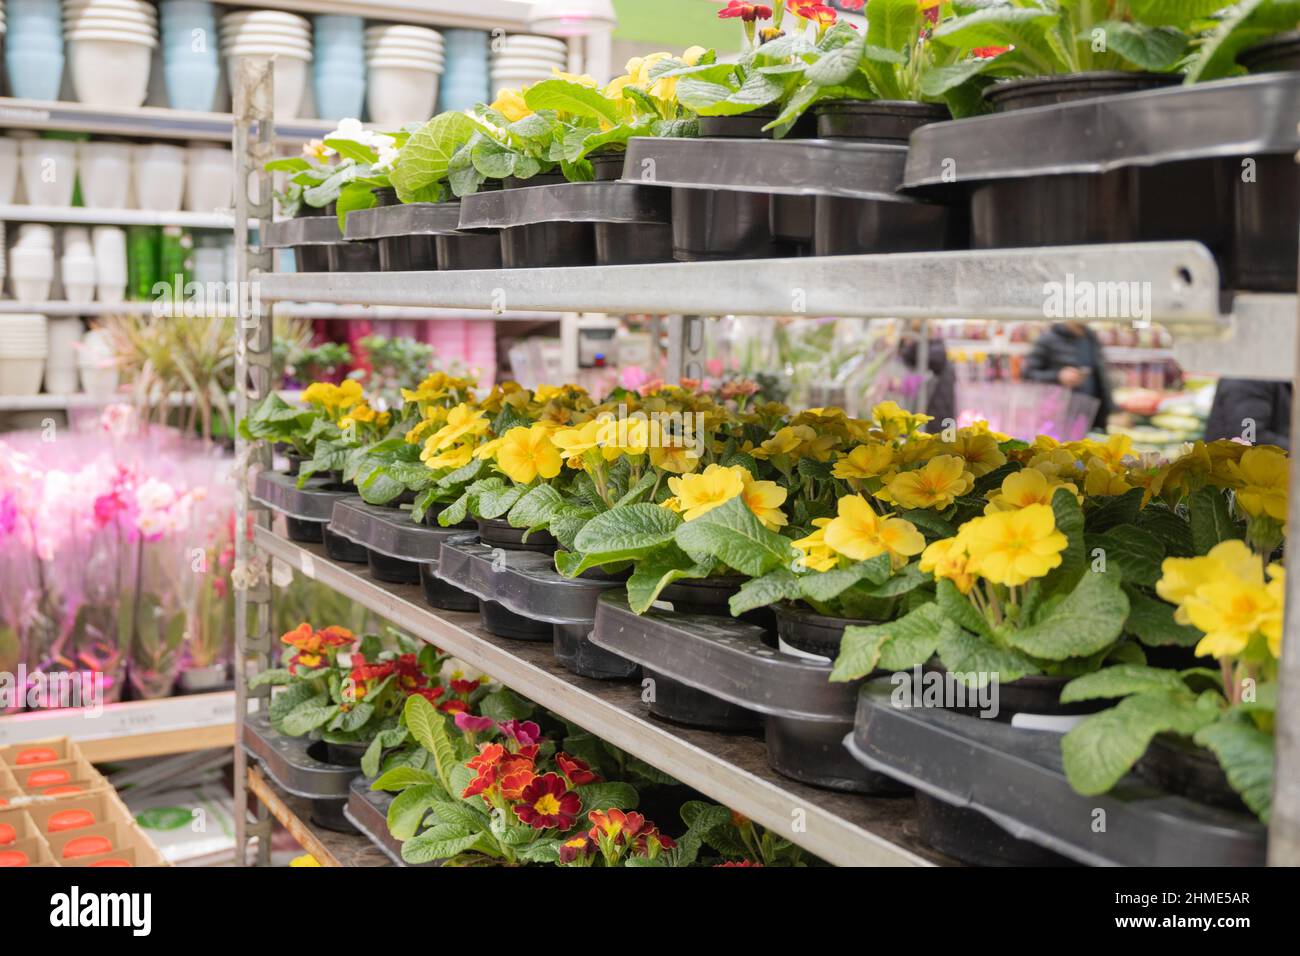 Primroses in pots store in the garden shop. Gardening and spring works Stock Photo